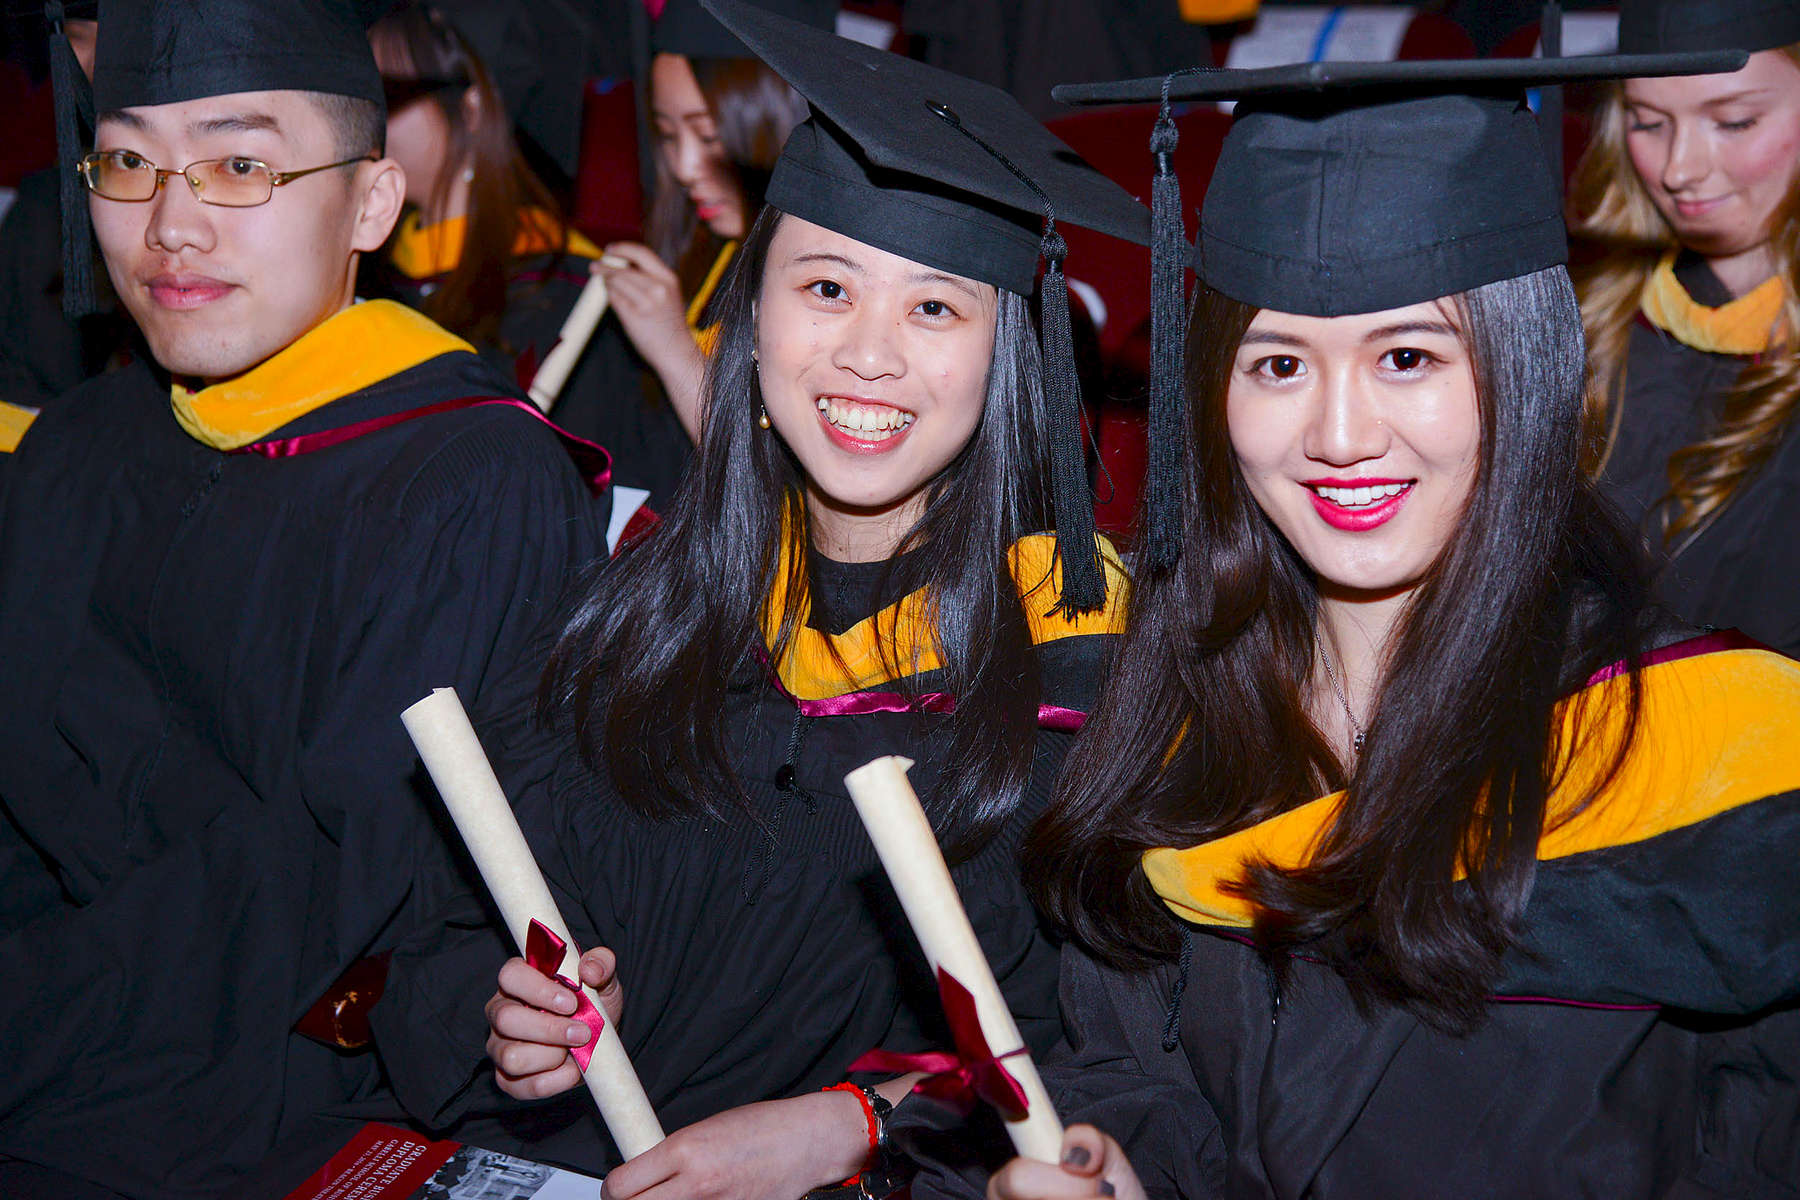 Fordham Graduate School of Business - Commencement - Beacon Theatre, NYC